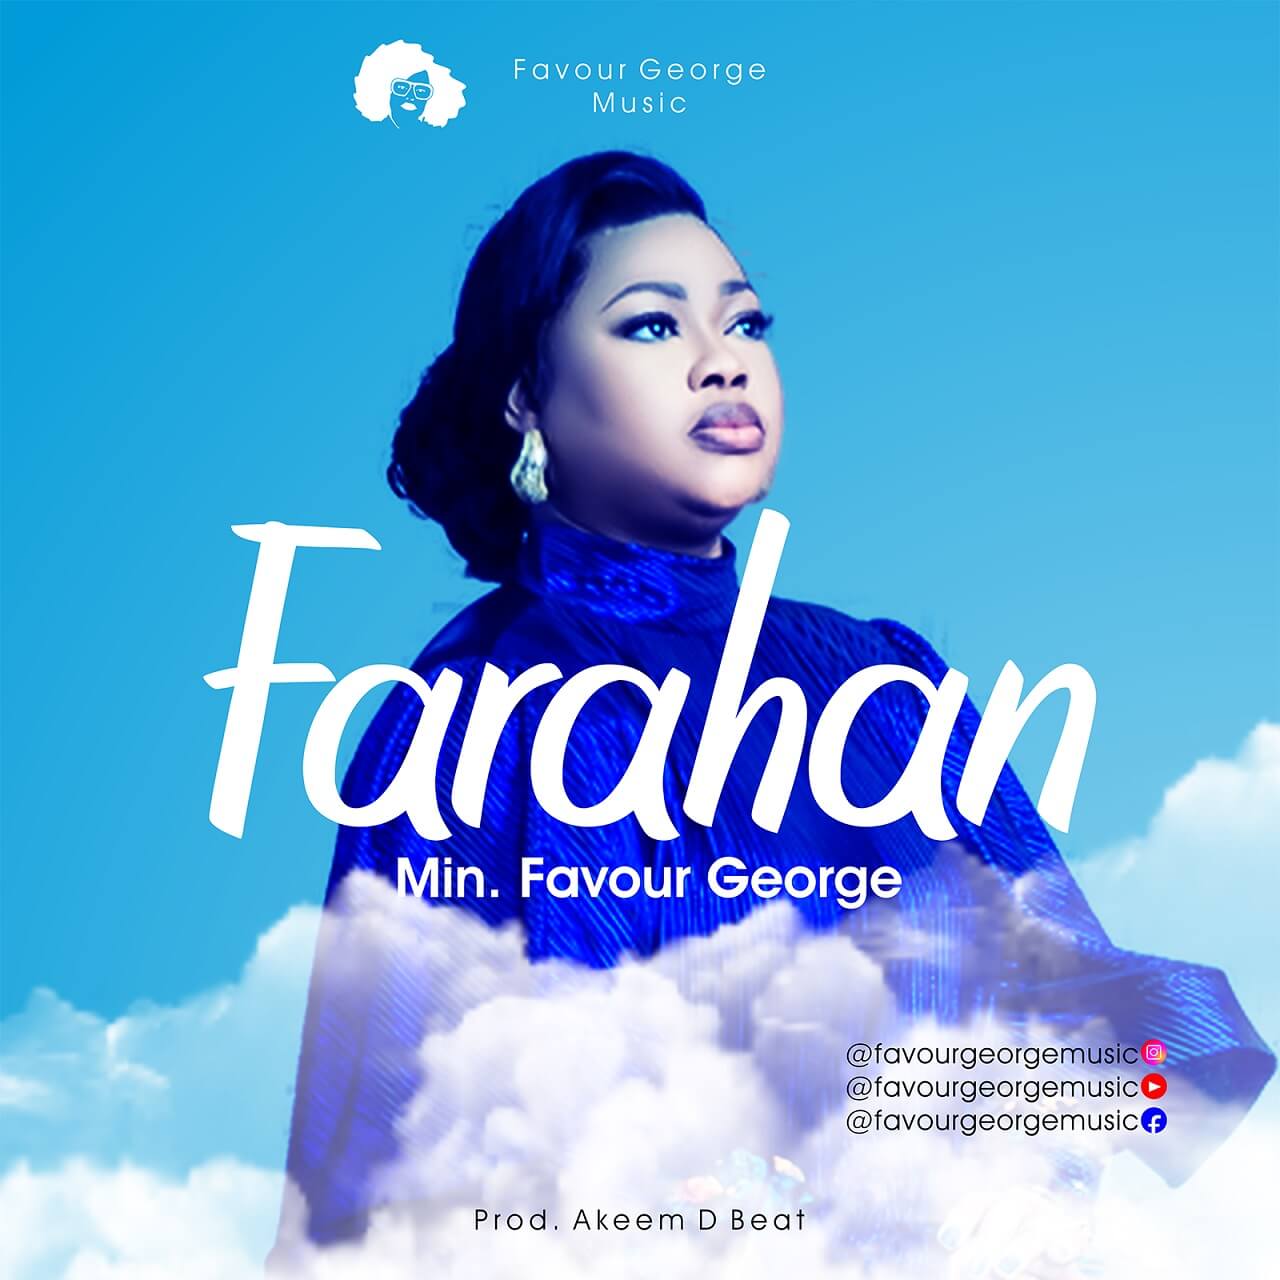 Farahan By Favour George